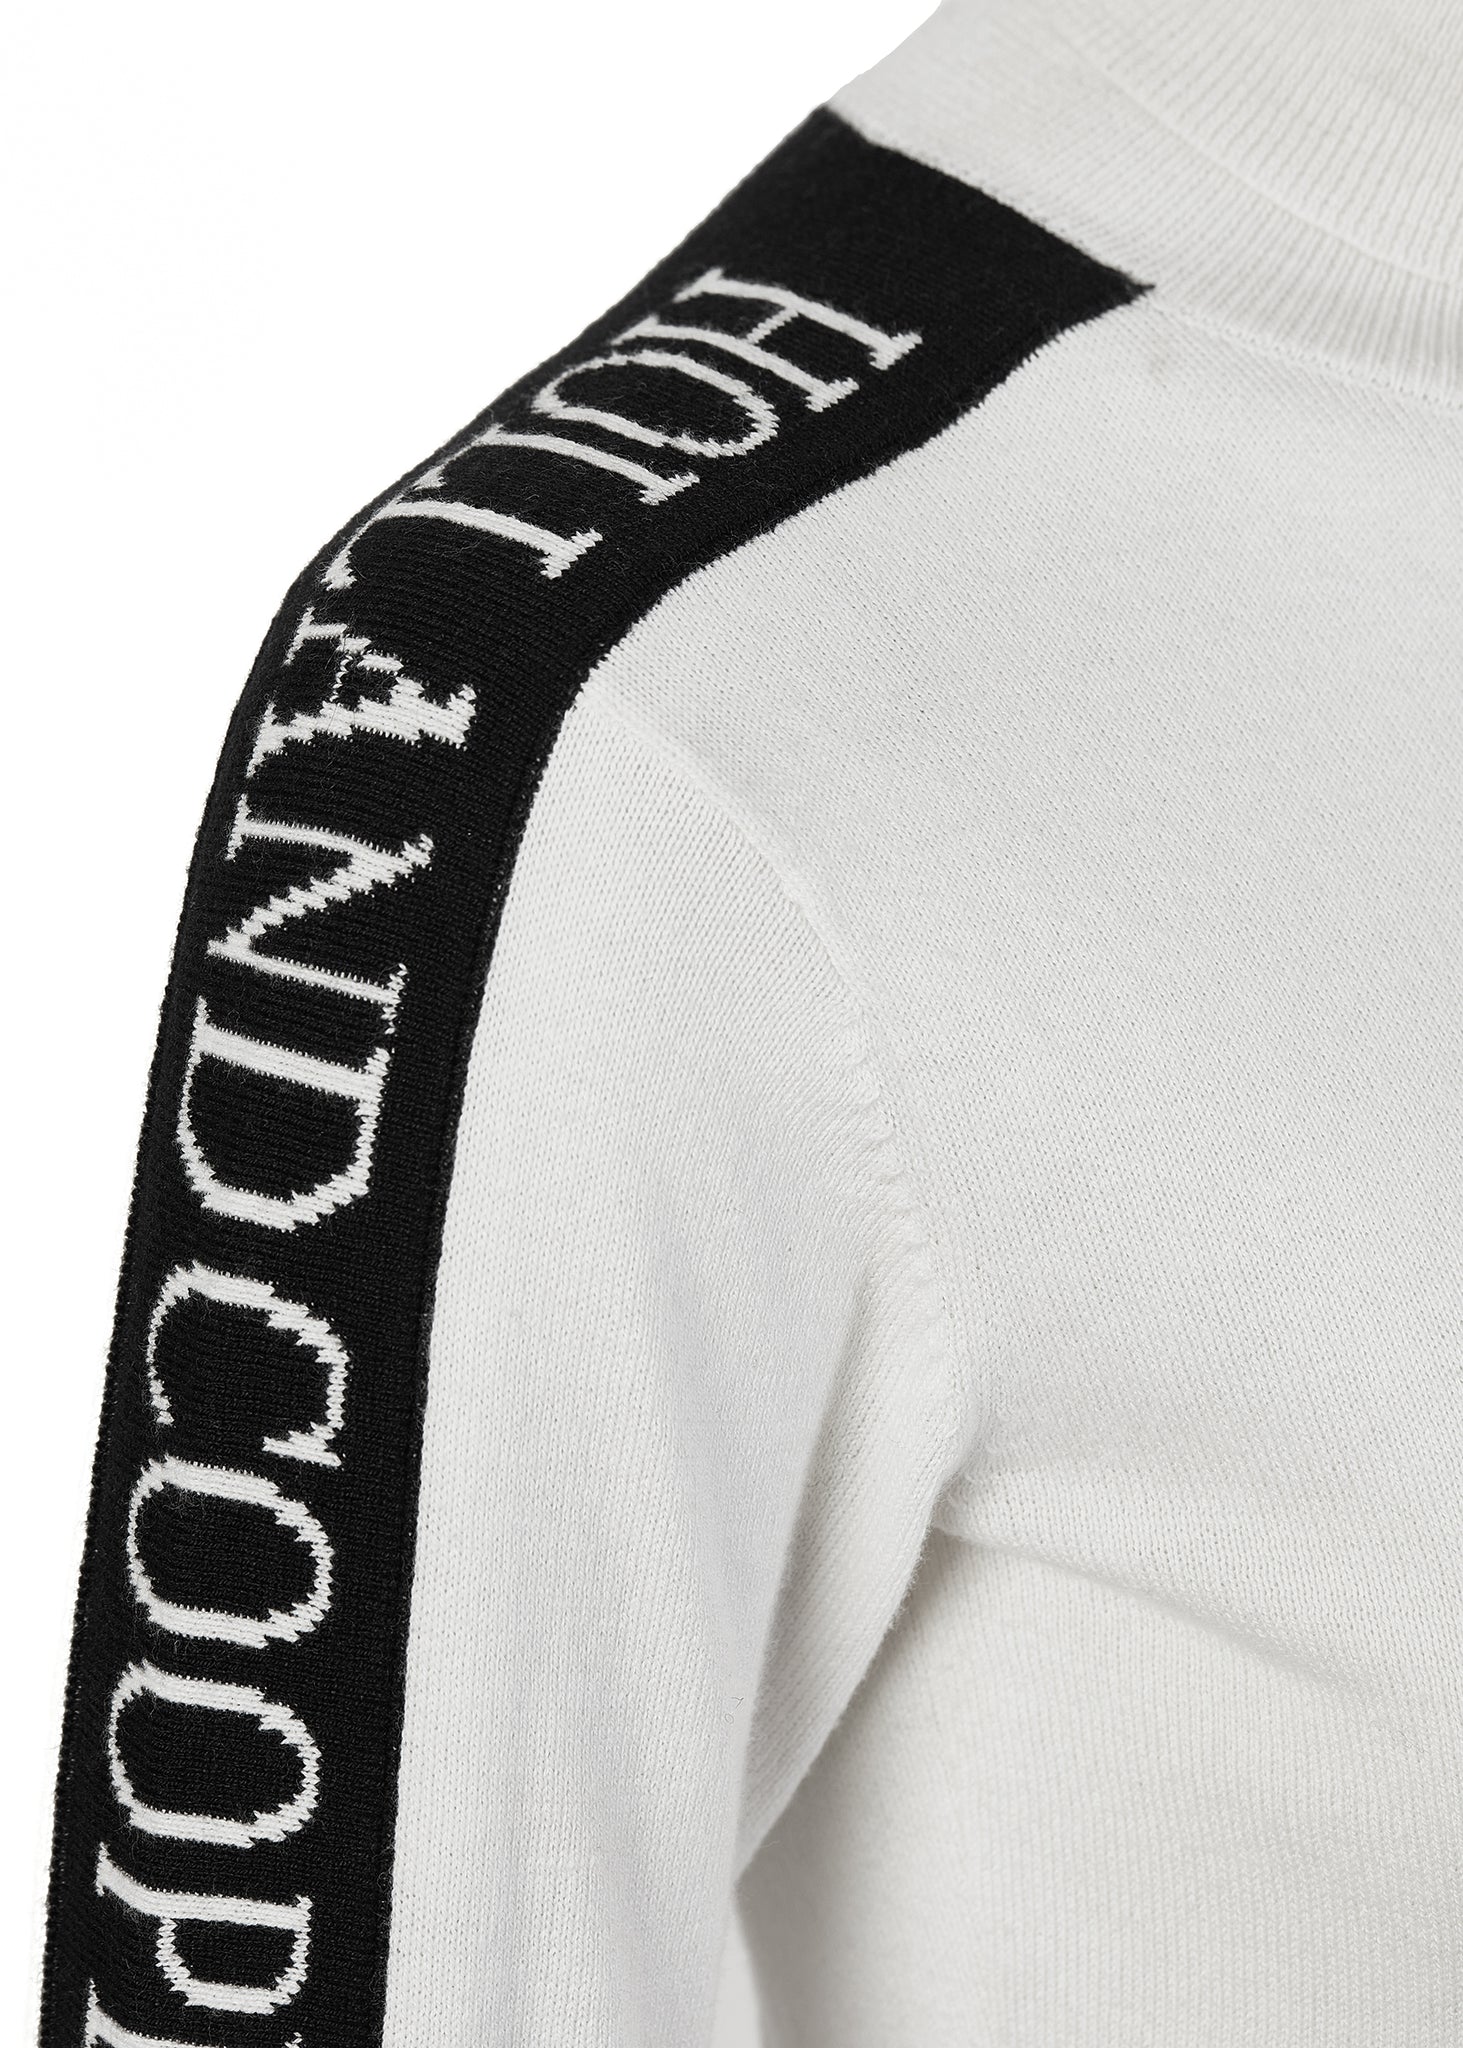 detail of black monogram intarsia knit panels down tops of arms onthermal fitted roll neck knit in white